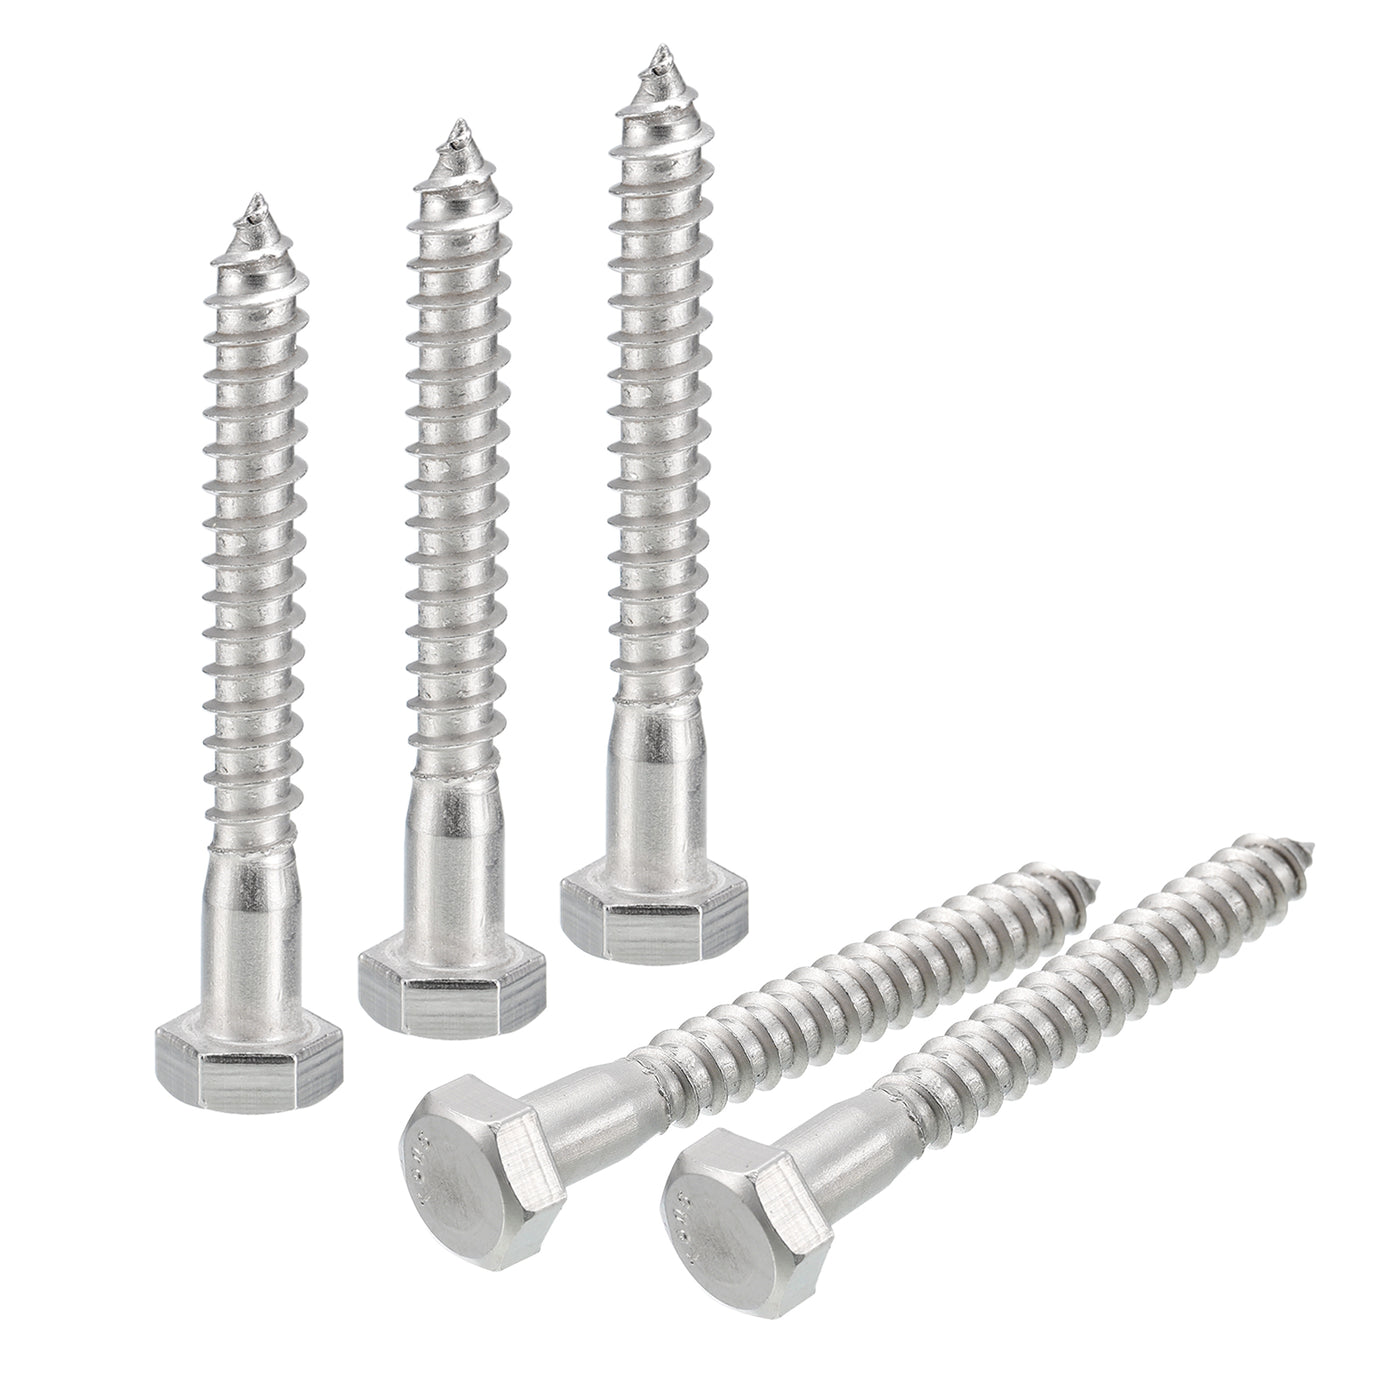 uxcell Uxcell Hex Head Lag Screws Bolts, 5pcs 5/16" x 2-1/2" 304 Stainless Steel Wood Screws